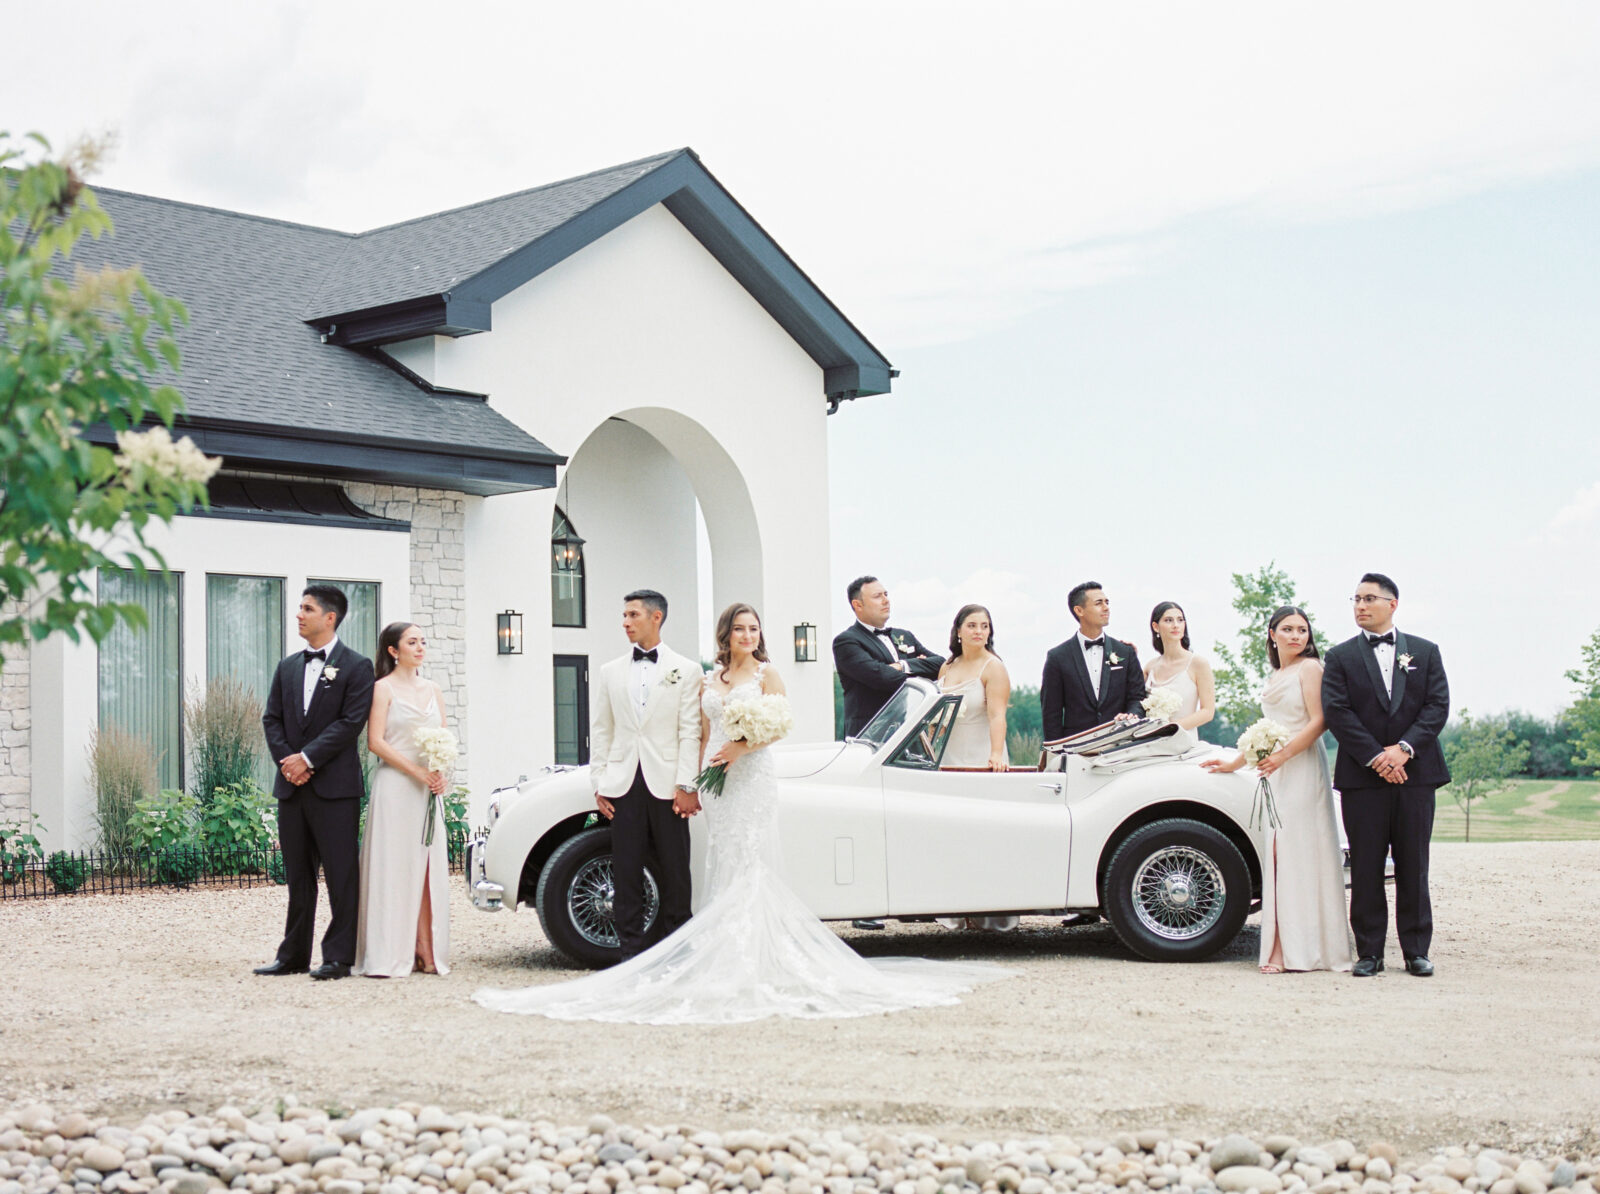 A Summer Wedding at Sparrow Lane That Exudes Timeless Luxury and Sophistication